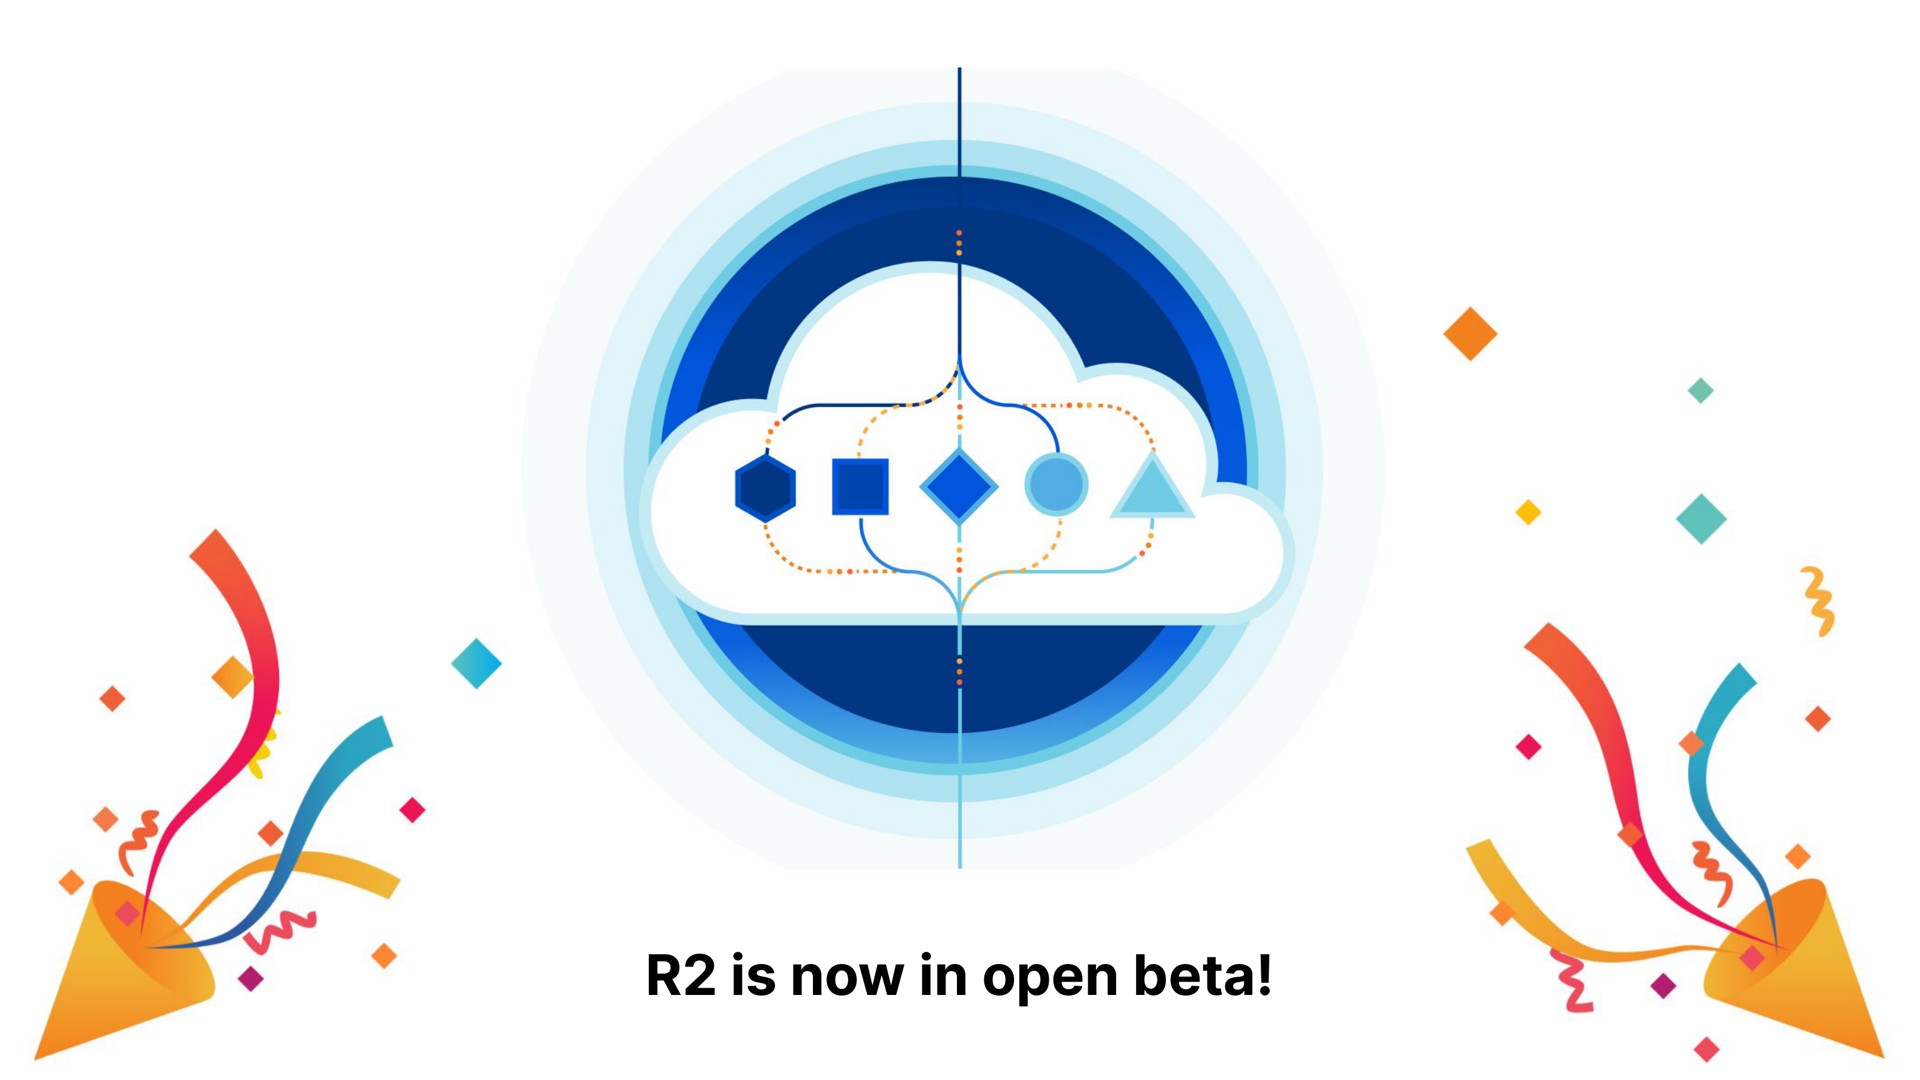 is now in open beta | Cloudflare